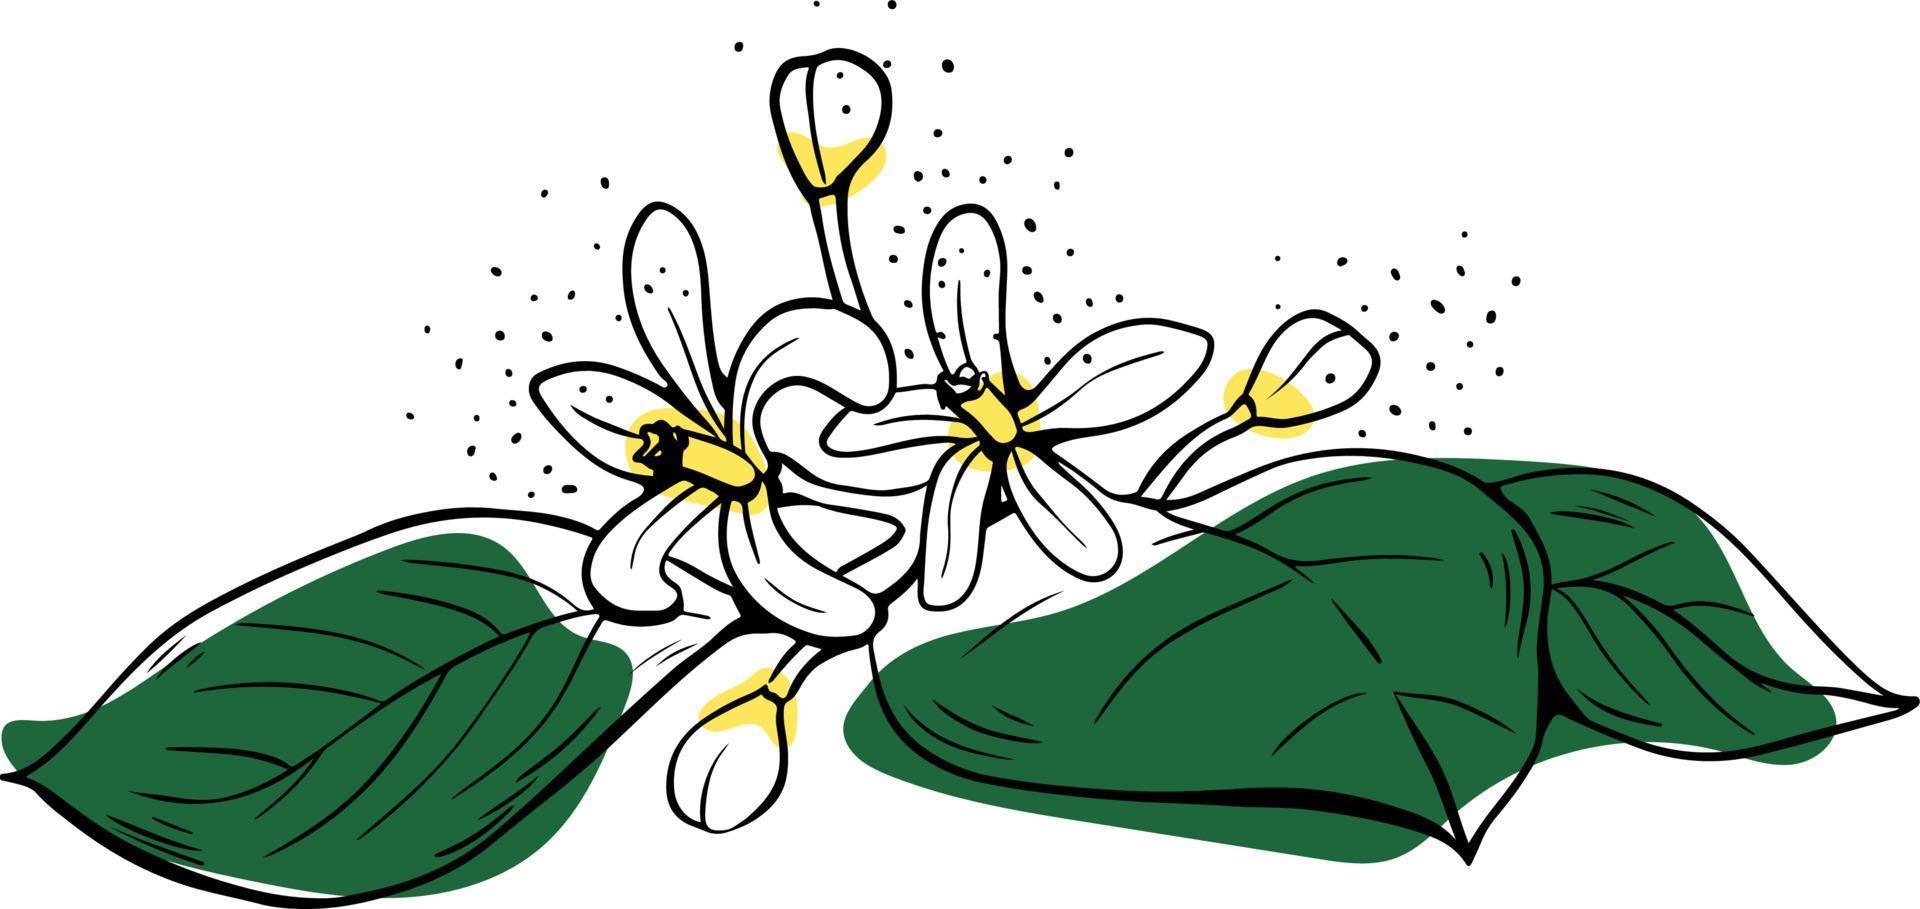 Hand drawn lineart white lemon flowers with green leaves on white background vector